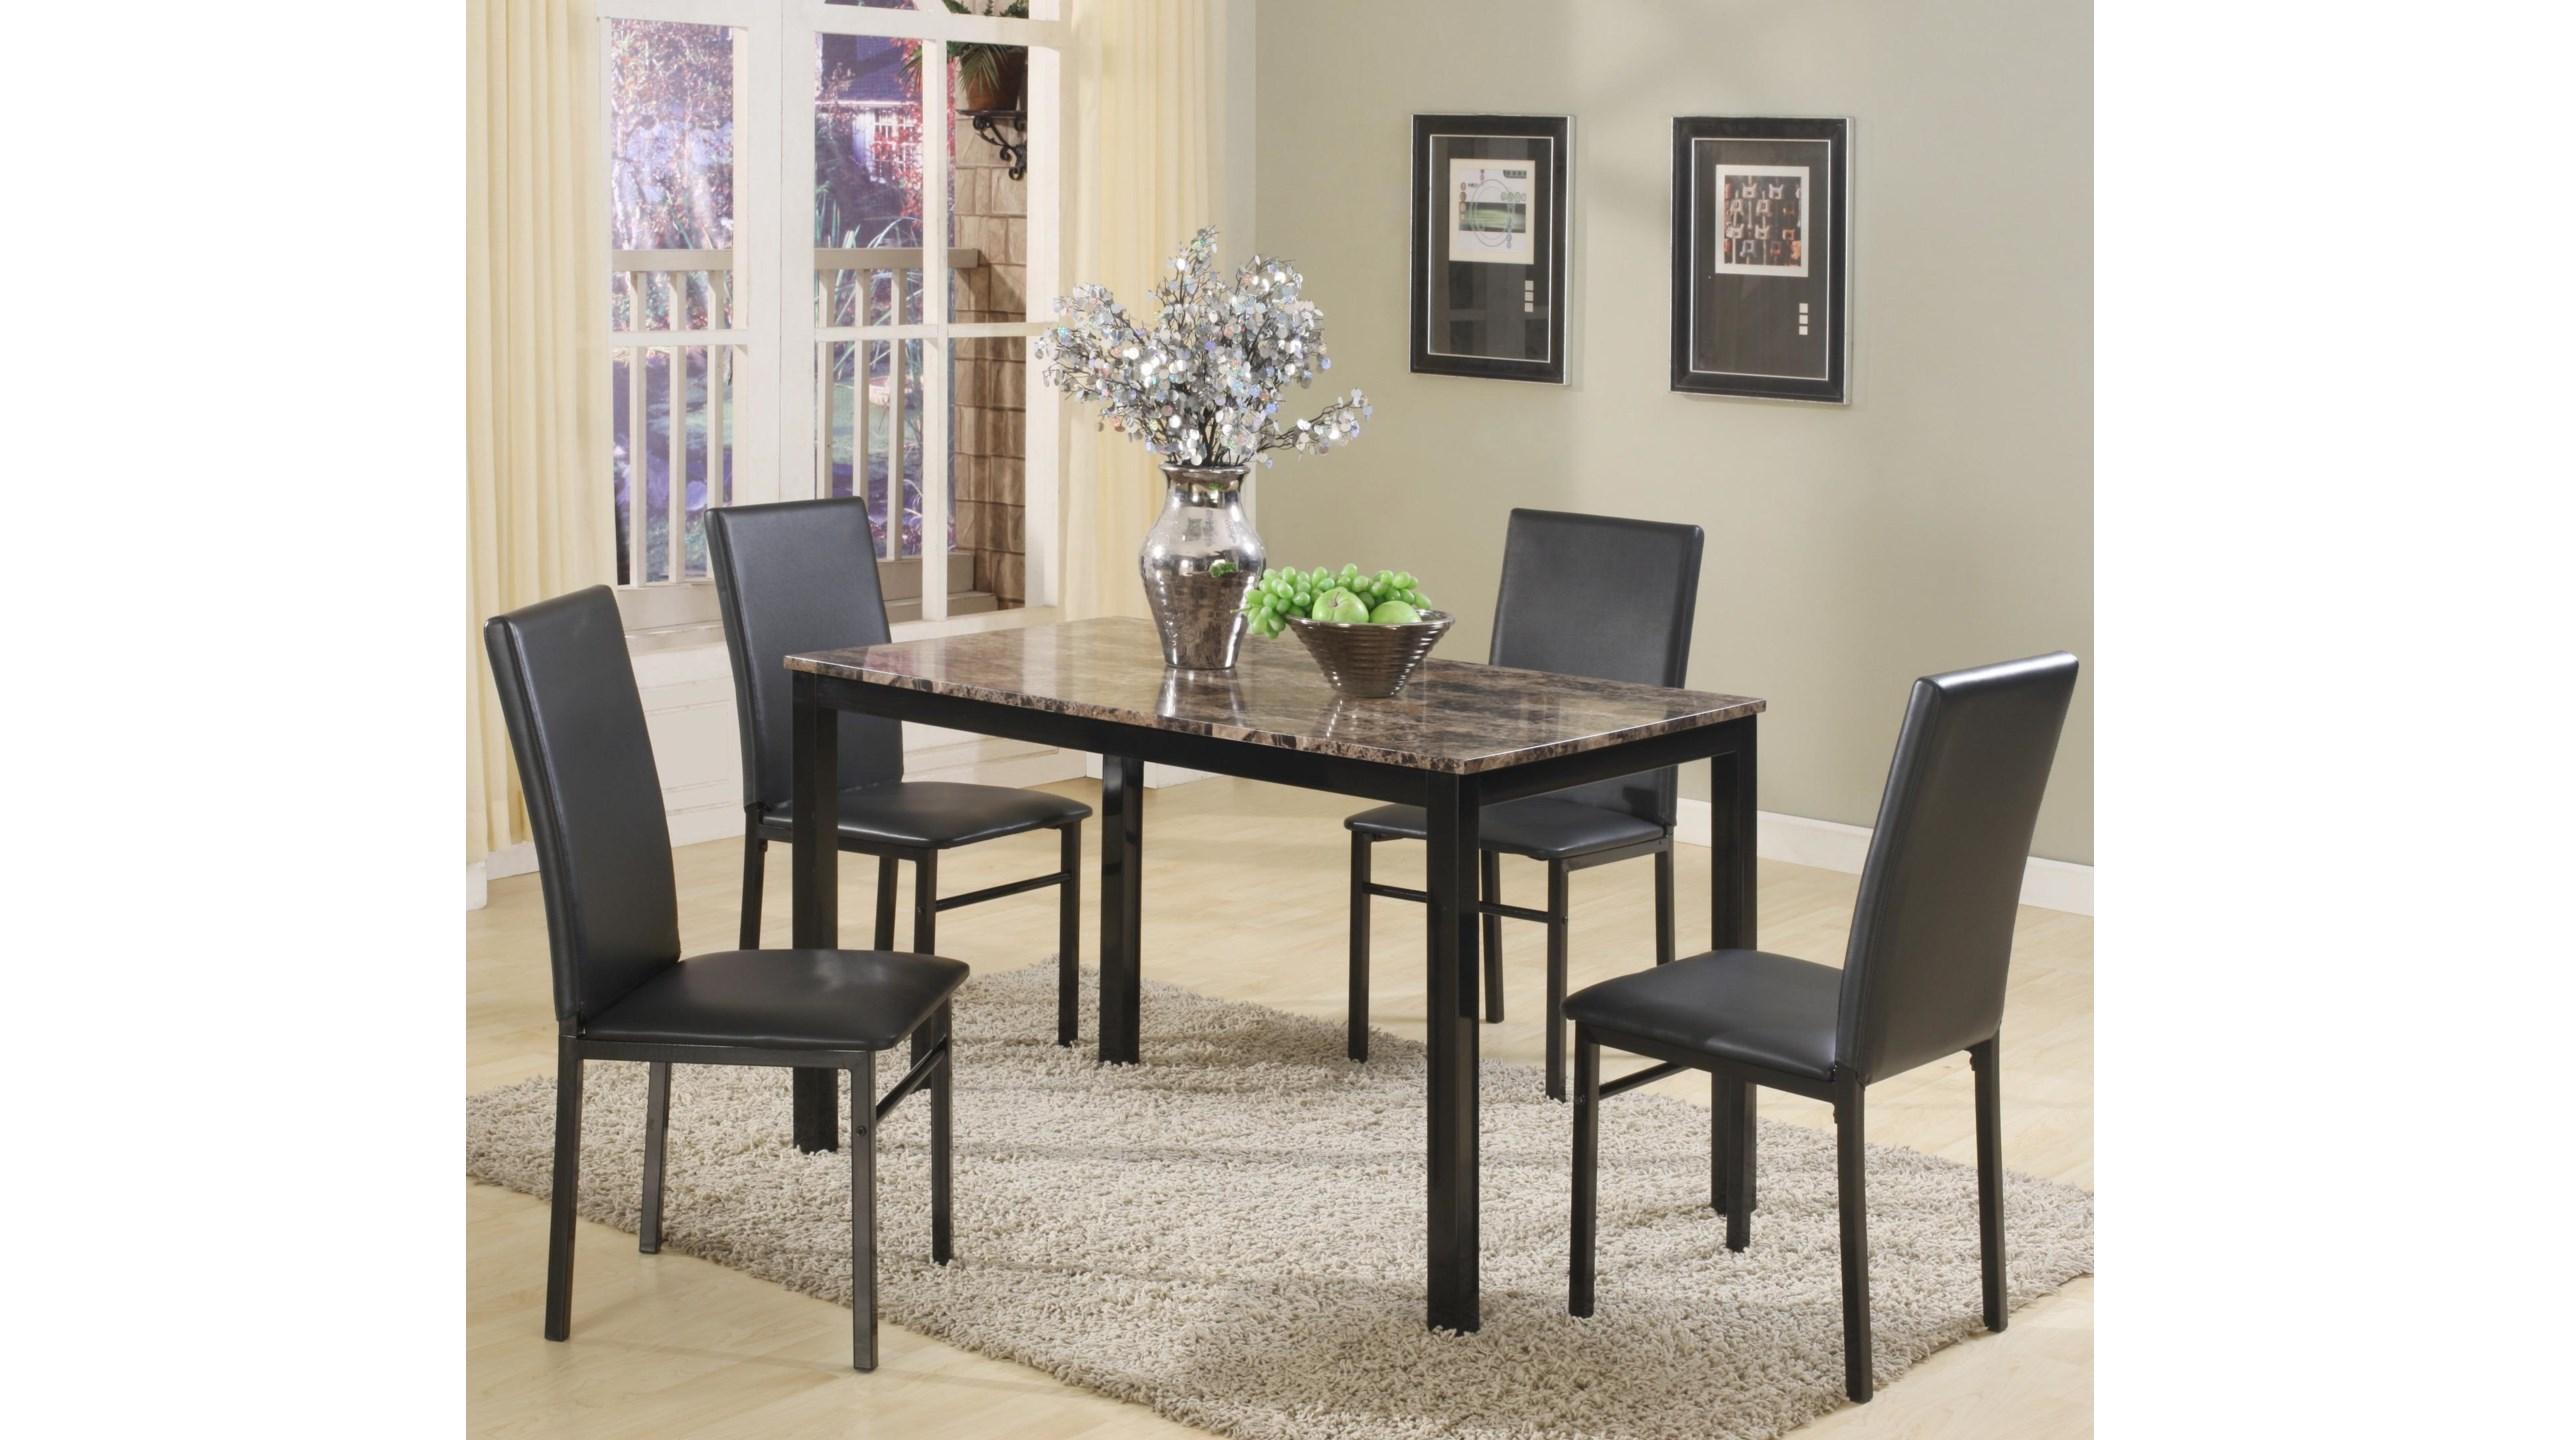 Transitional, Simple Dining Room Set Aiden 1217SET-5pcs in Brown PU